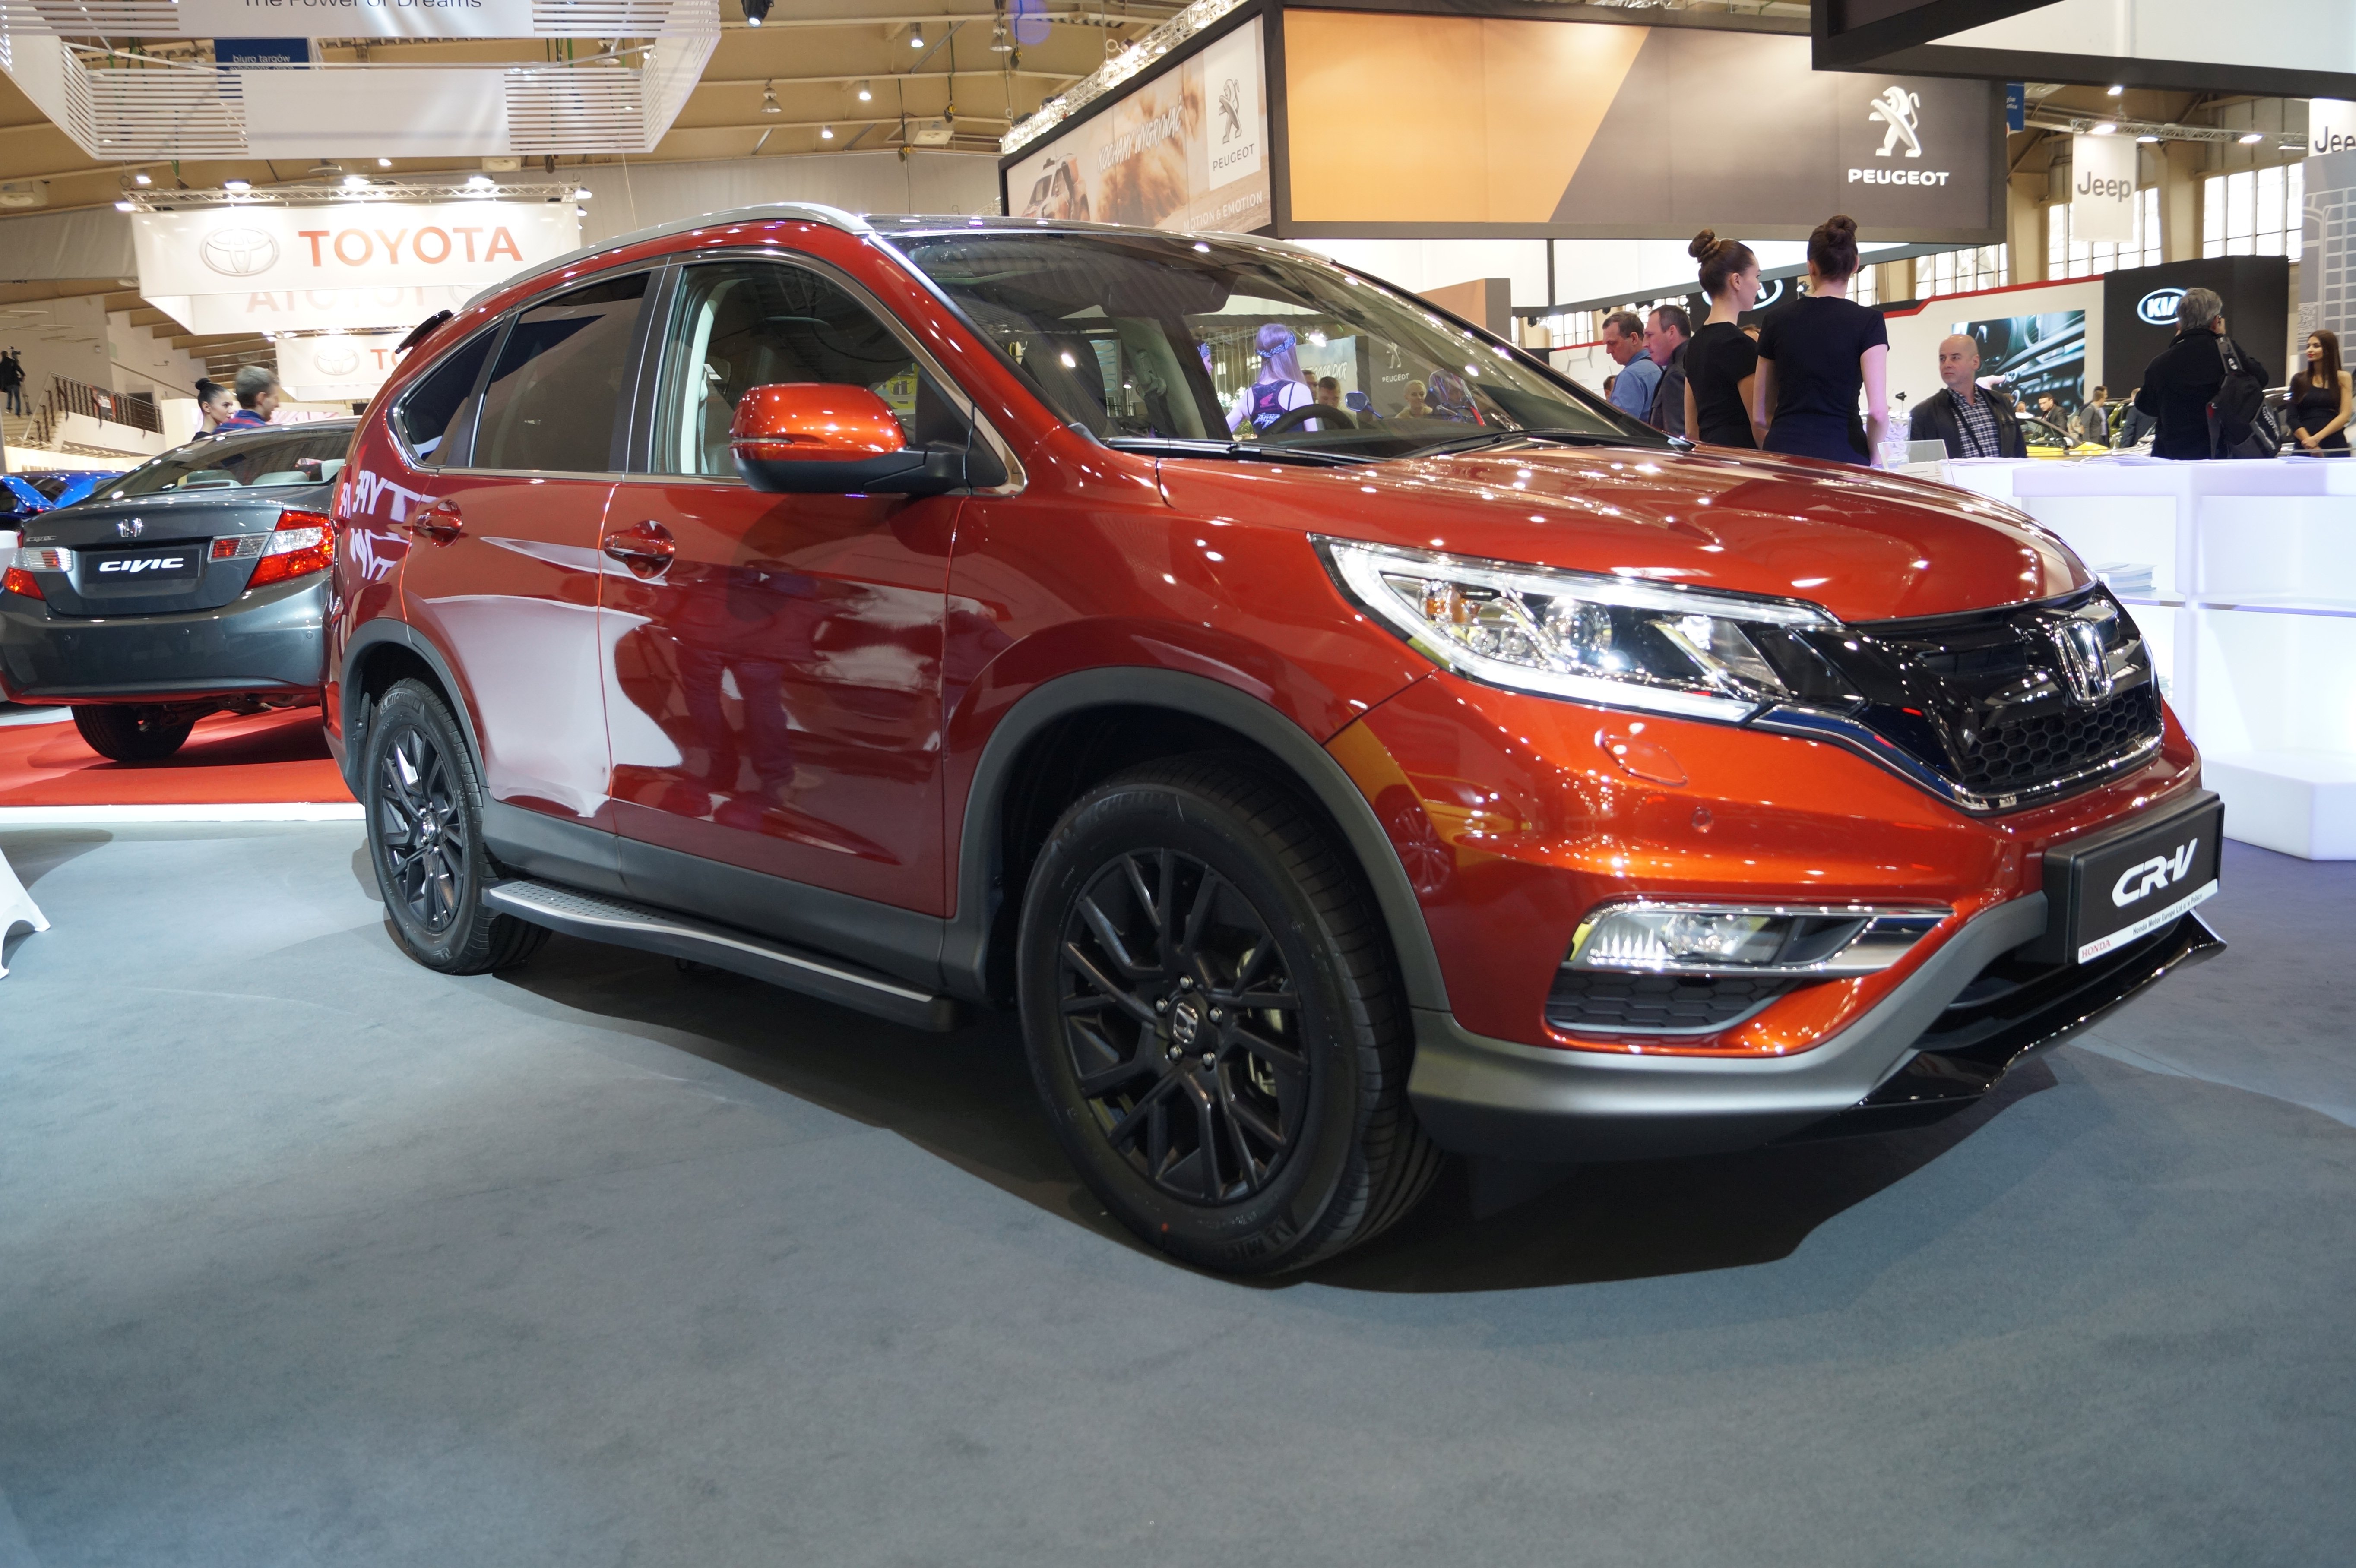 2016 Honda CRV Specifications, Pricing, Pictures and Videos